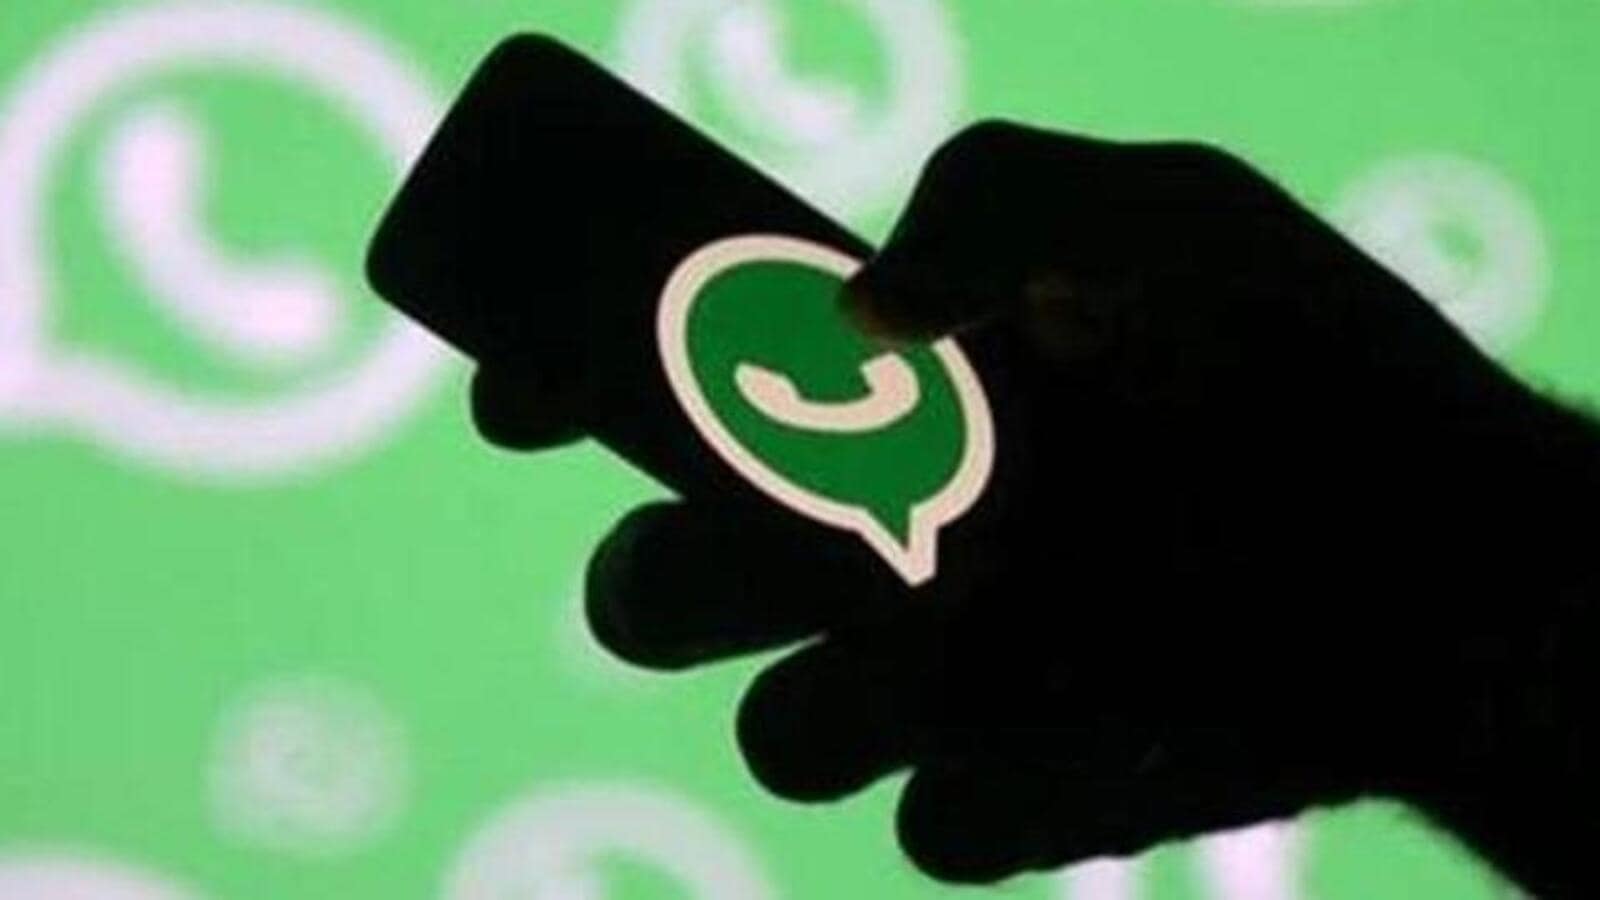 whatsapp-s-biggest-outage-has-been-resolved-but-meta-doesn-t-say-what-broke